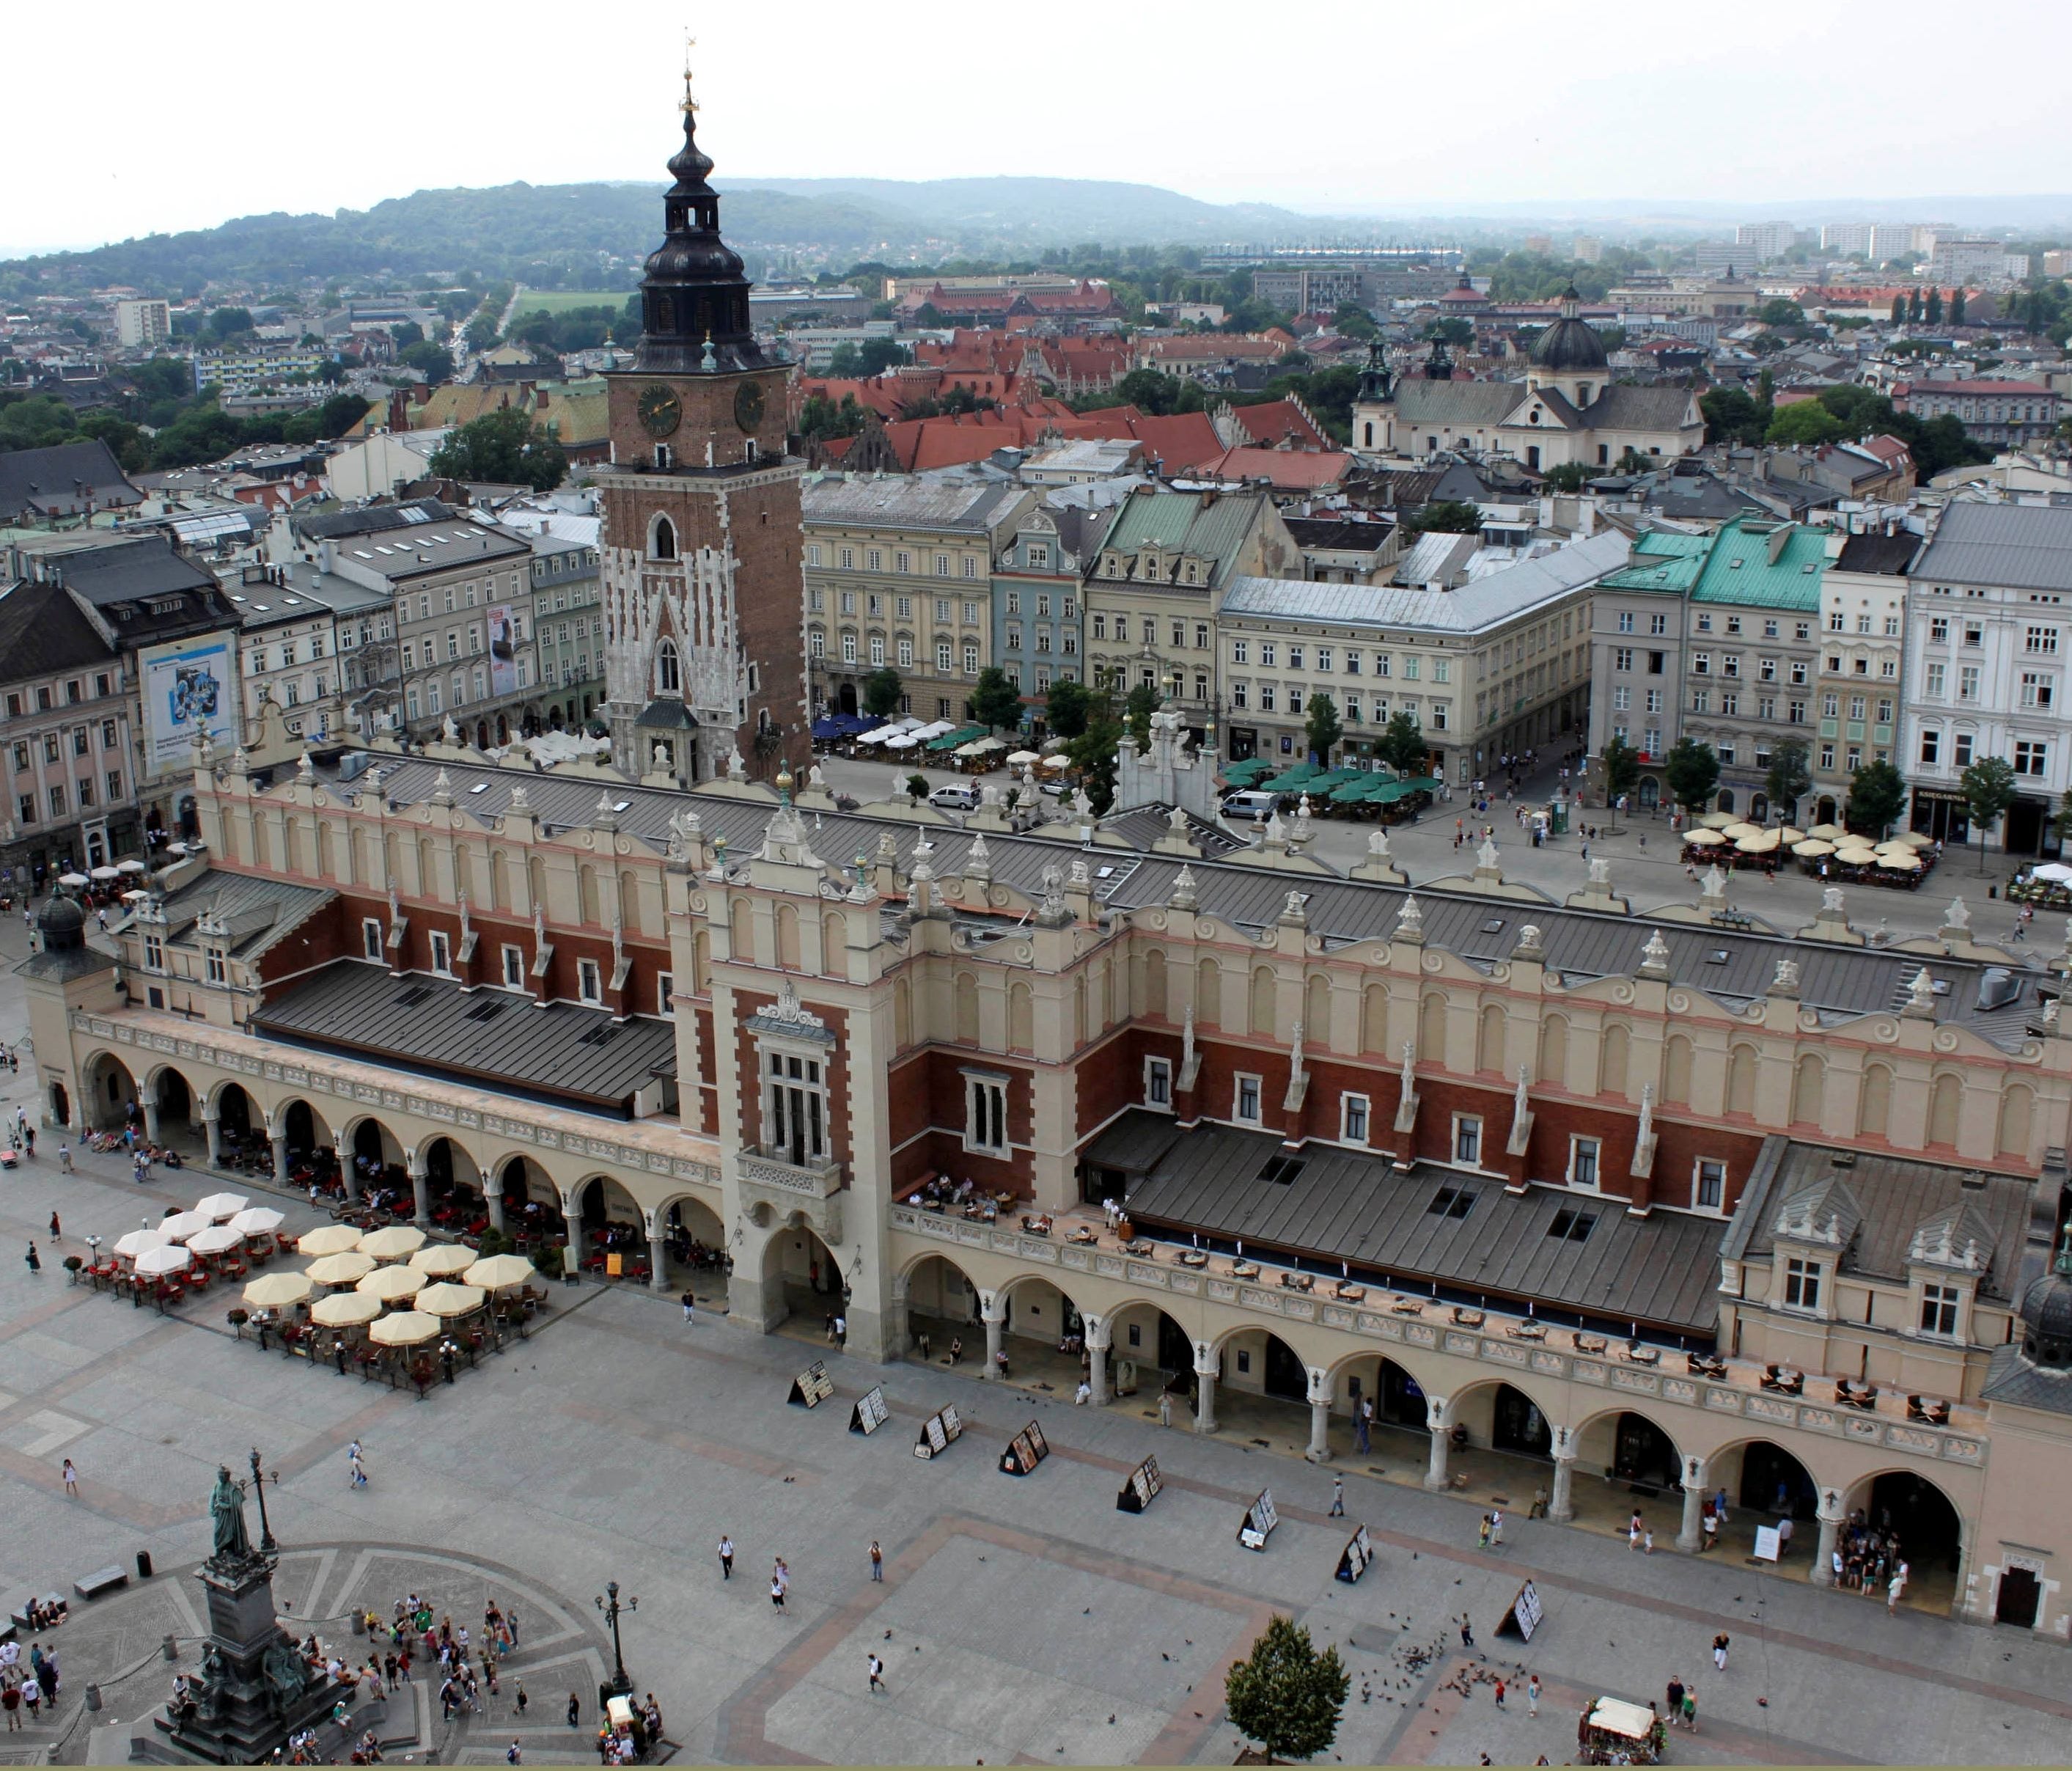 7 and 6: Poland and Hungary, 22 days: Poland's two primary visitor centers, Warsaw and Krakow (pictured), both offer a mix of historical architecture and 